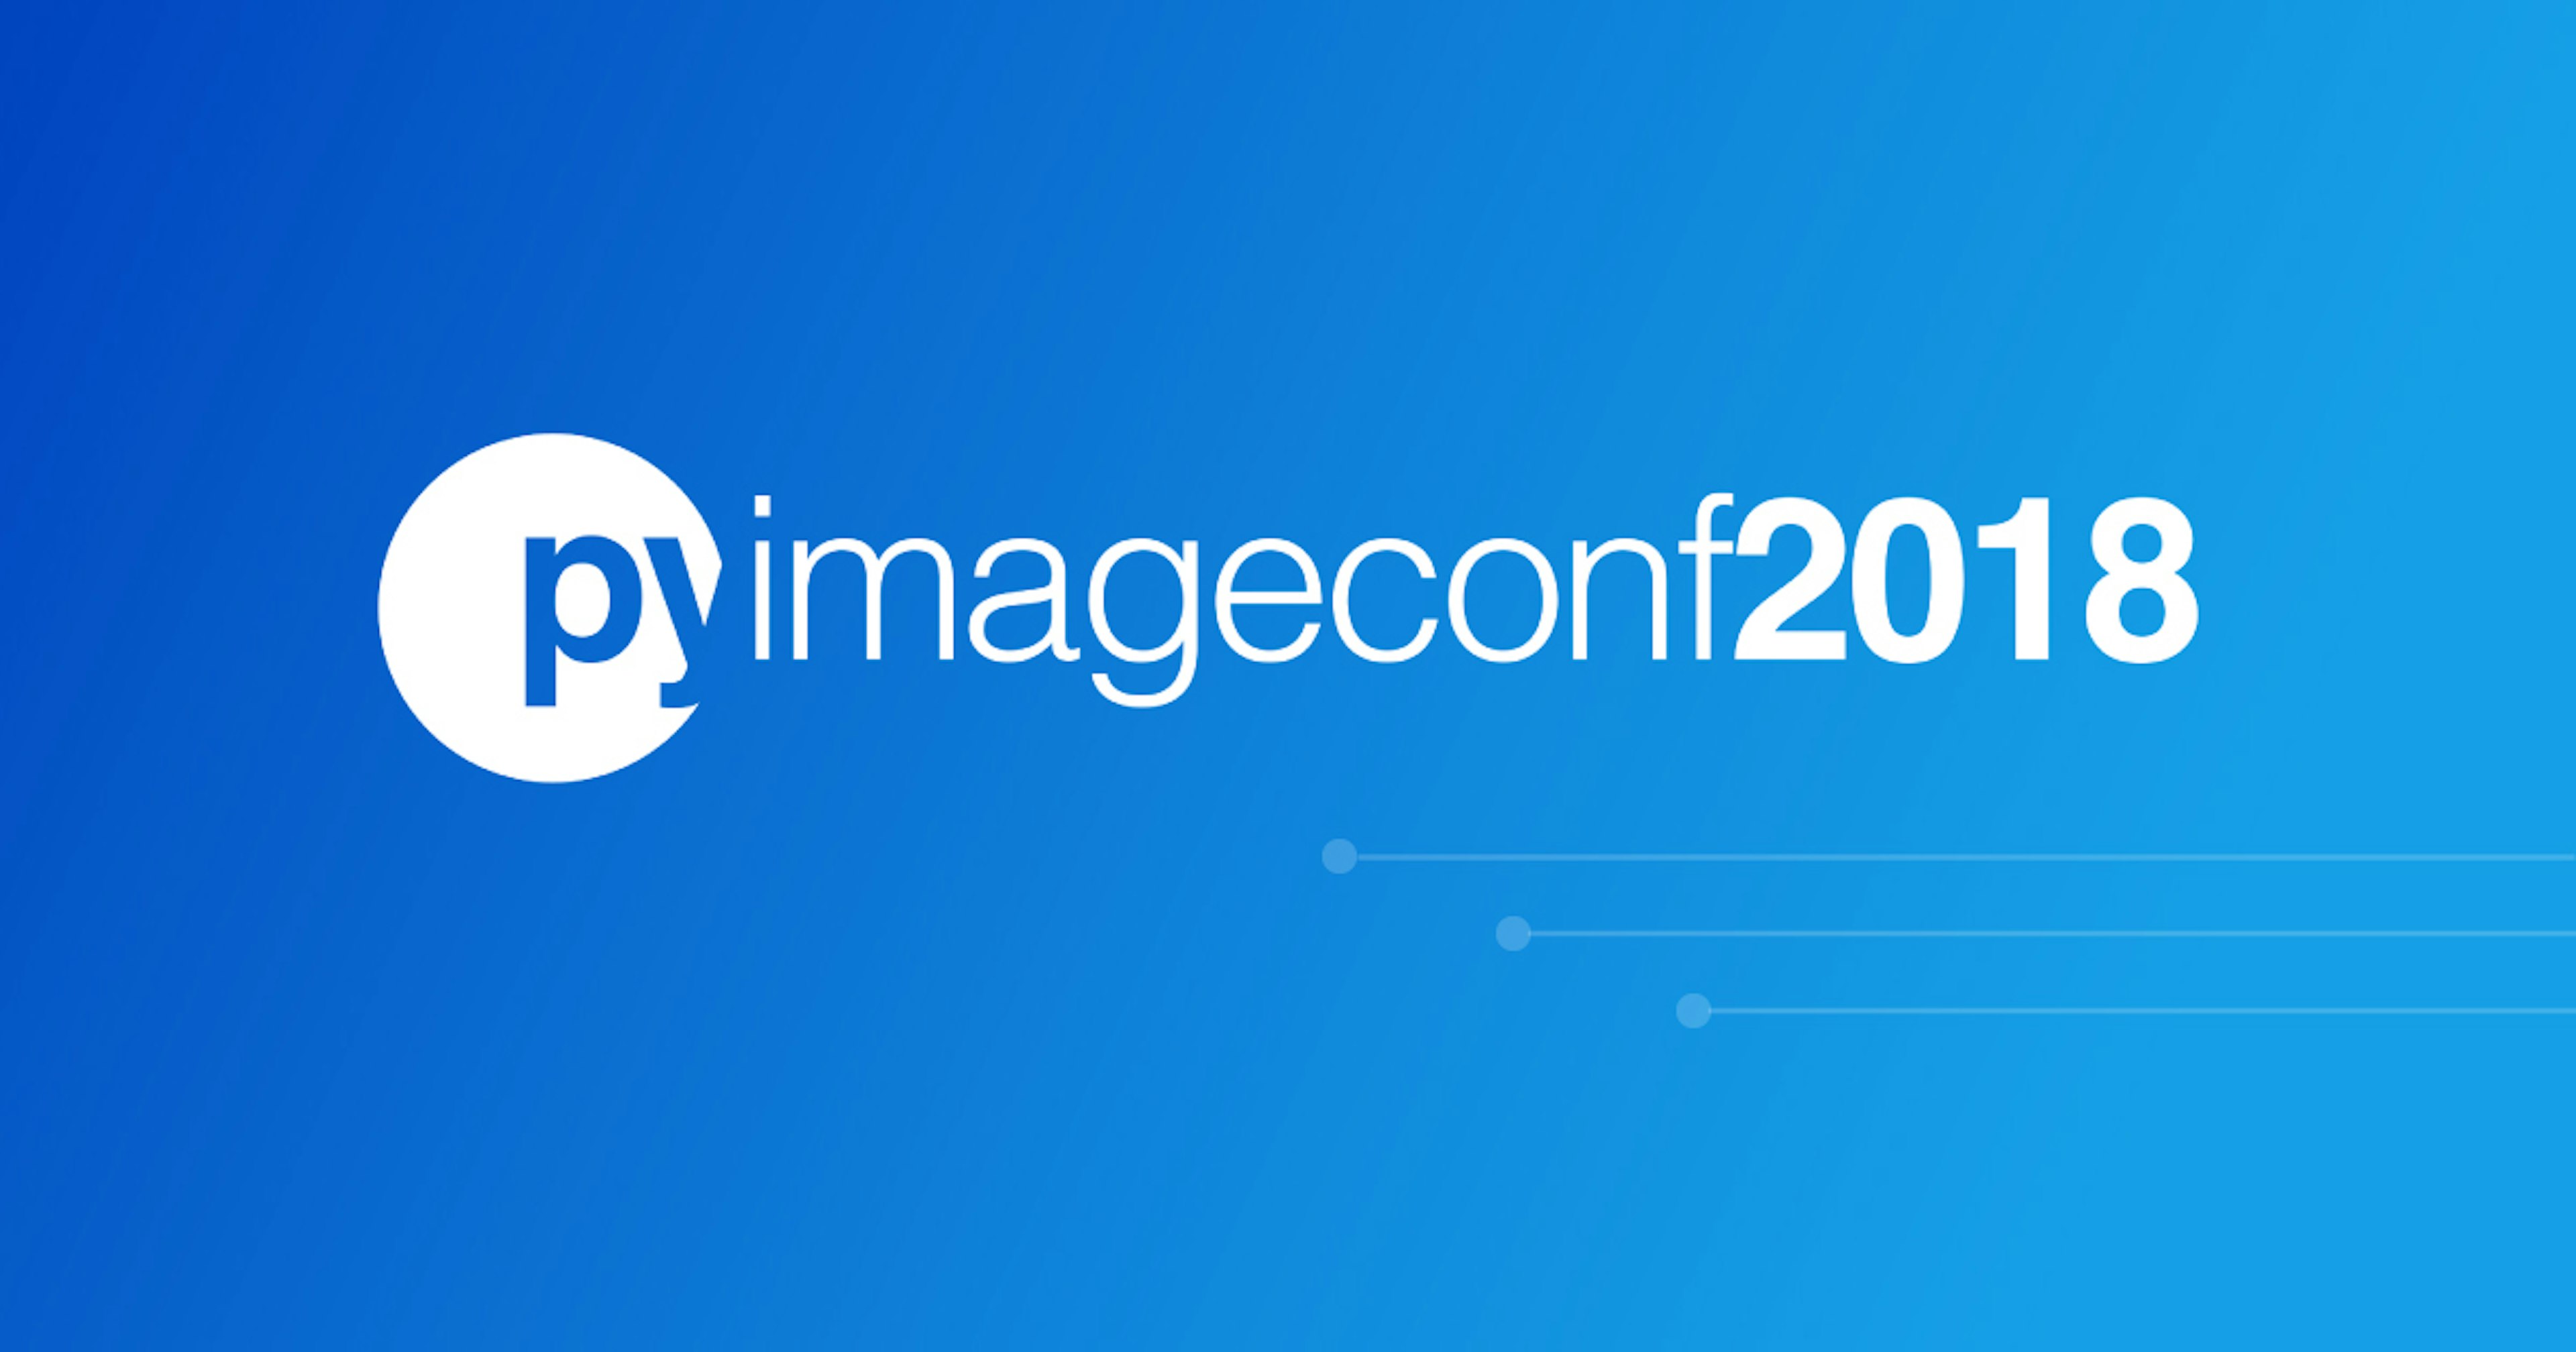 Hosting an Object Detection workshop and sponsoring at the PyImageConf